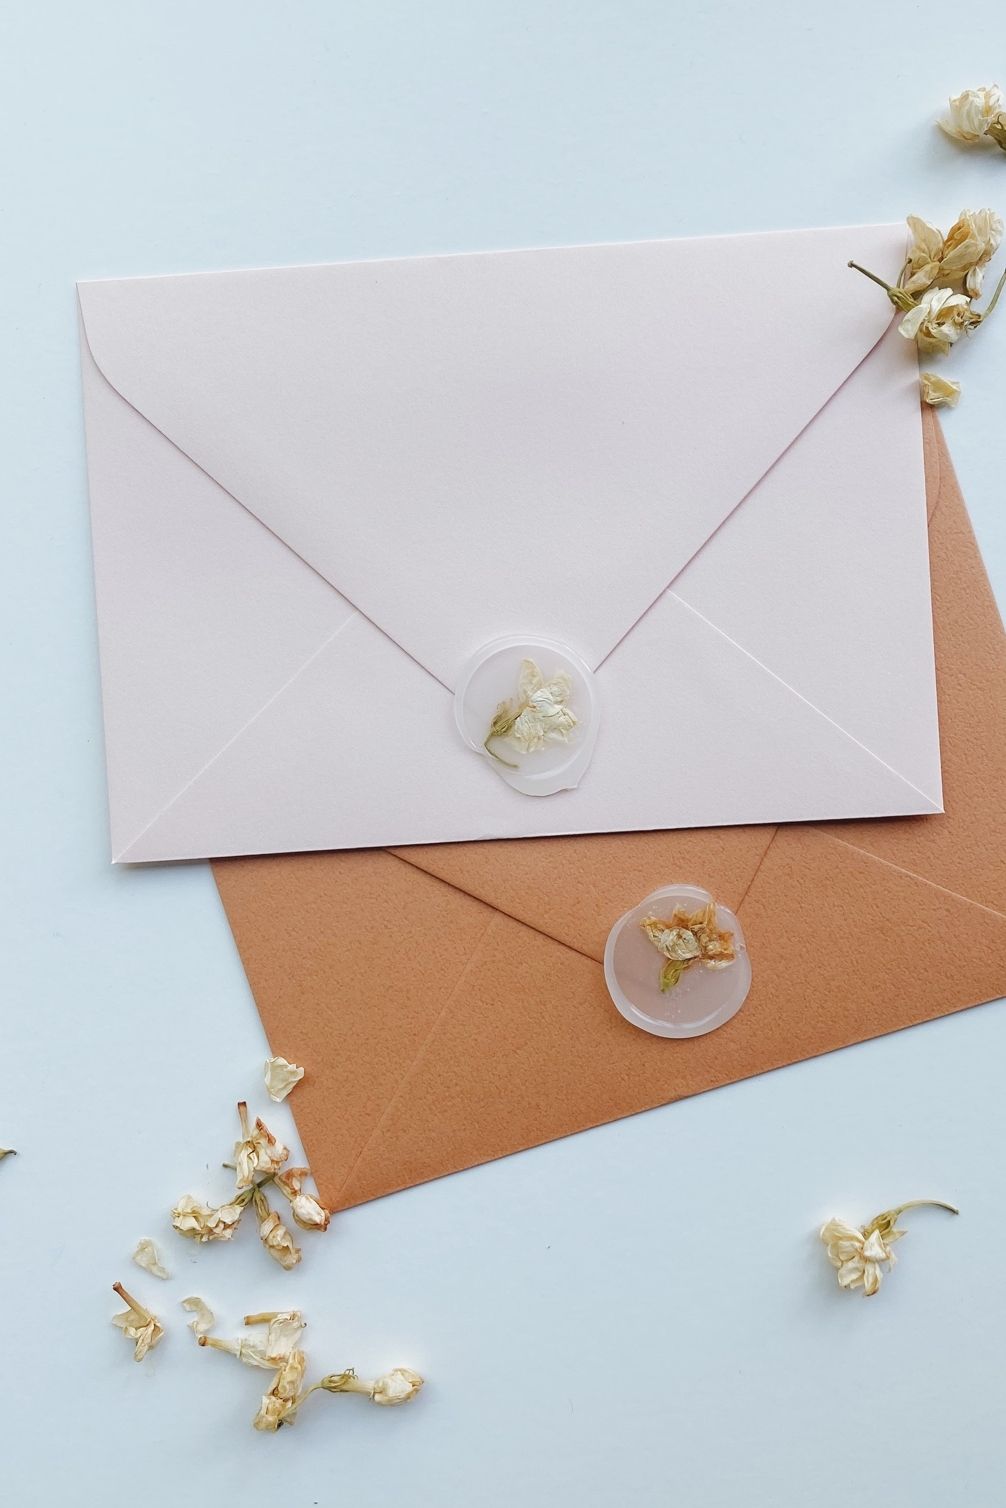 clear wax seal on envelope with dried flowers